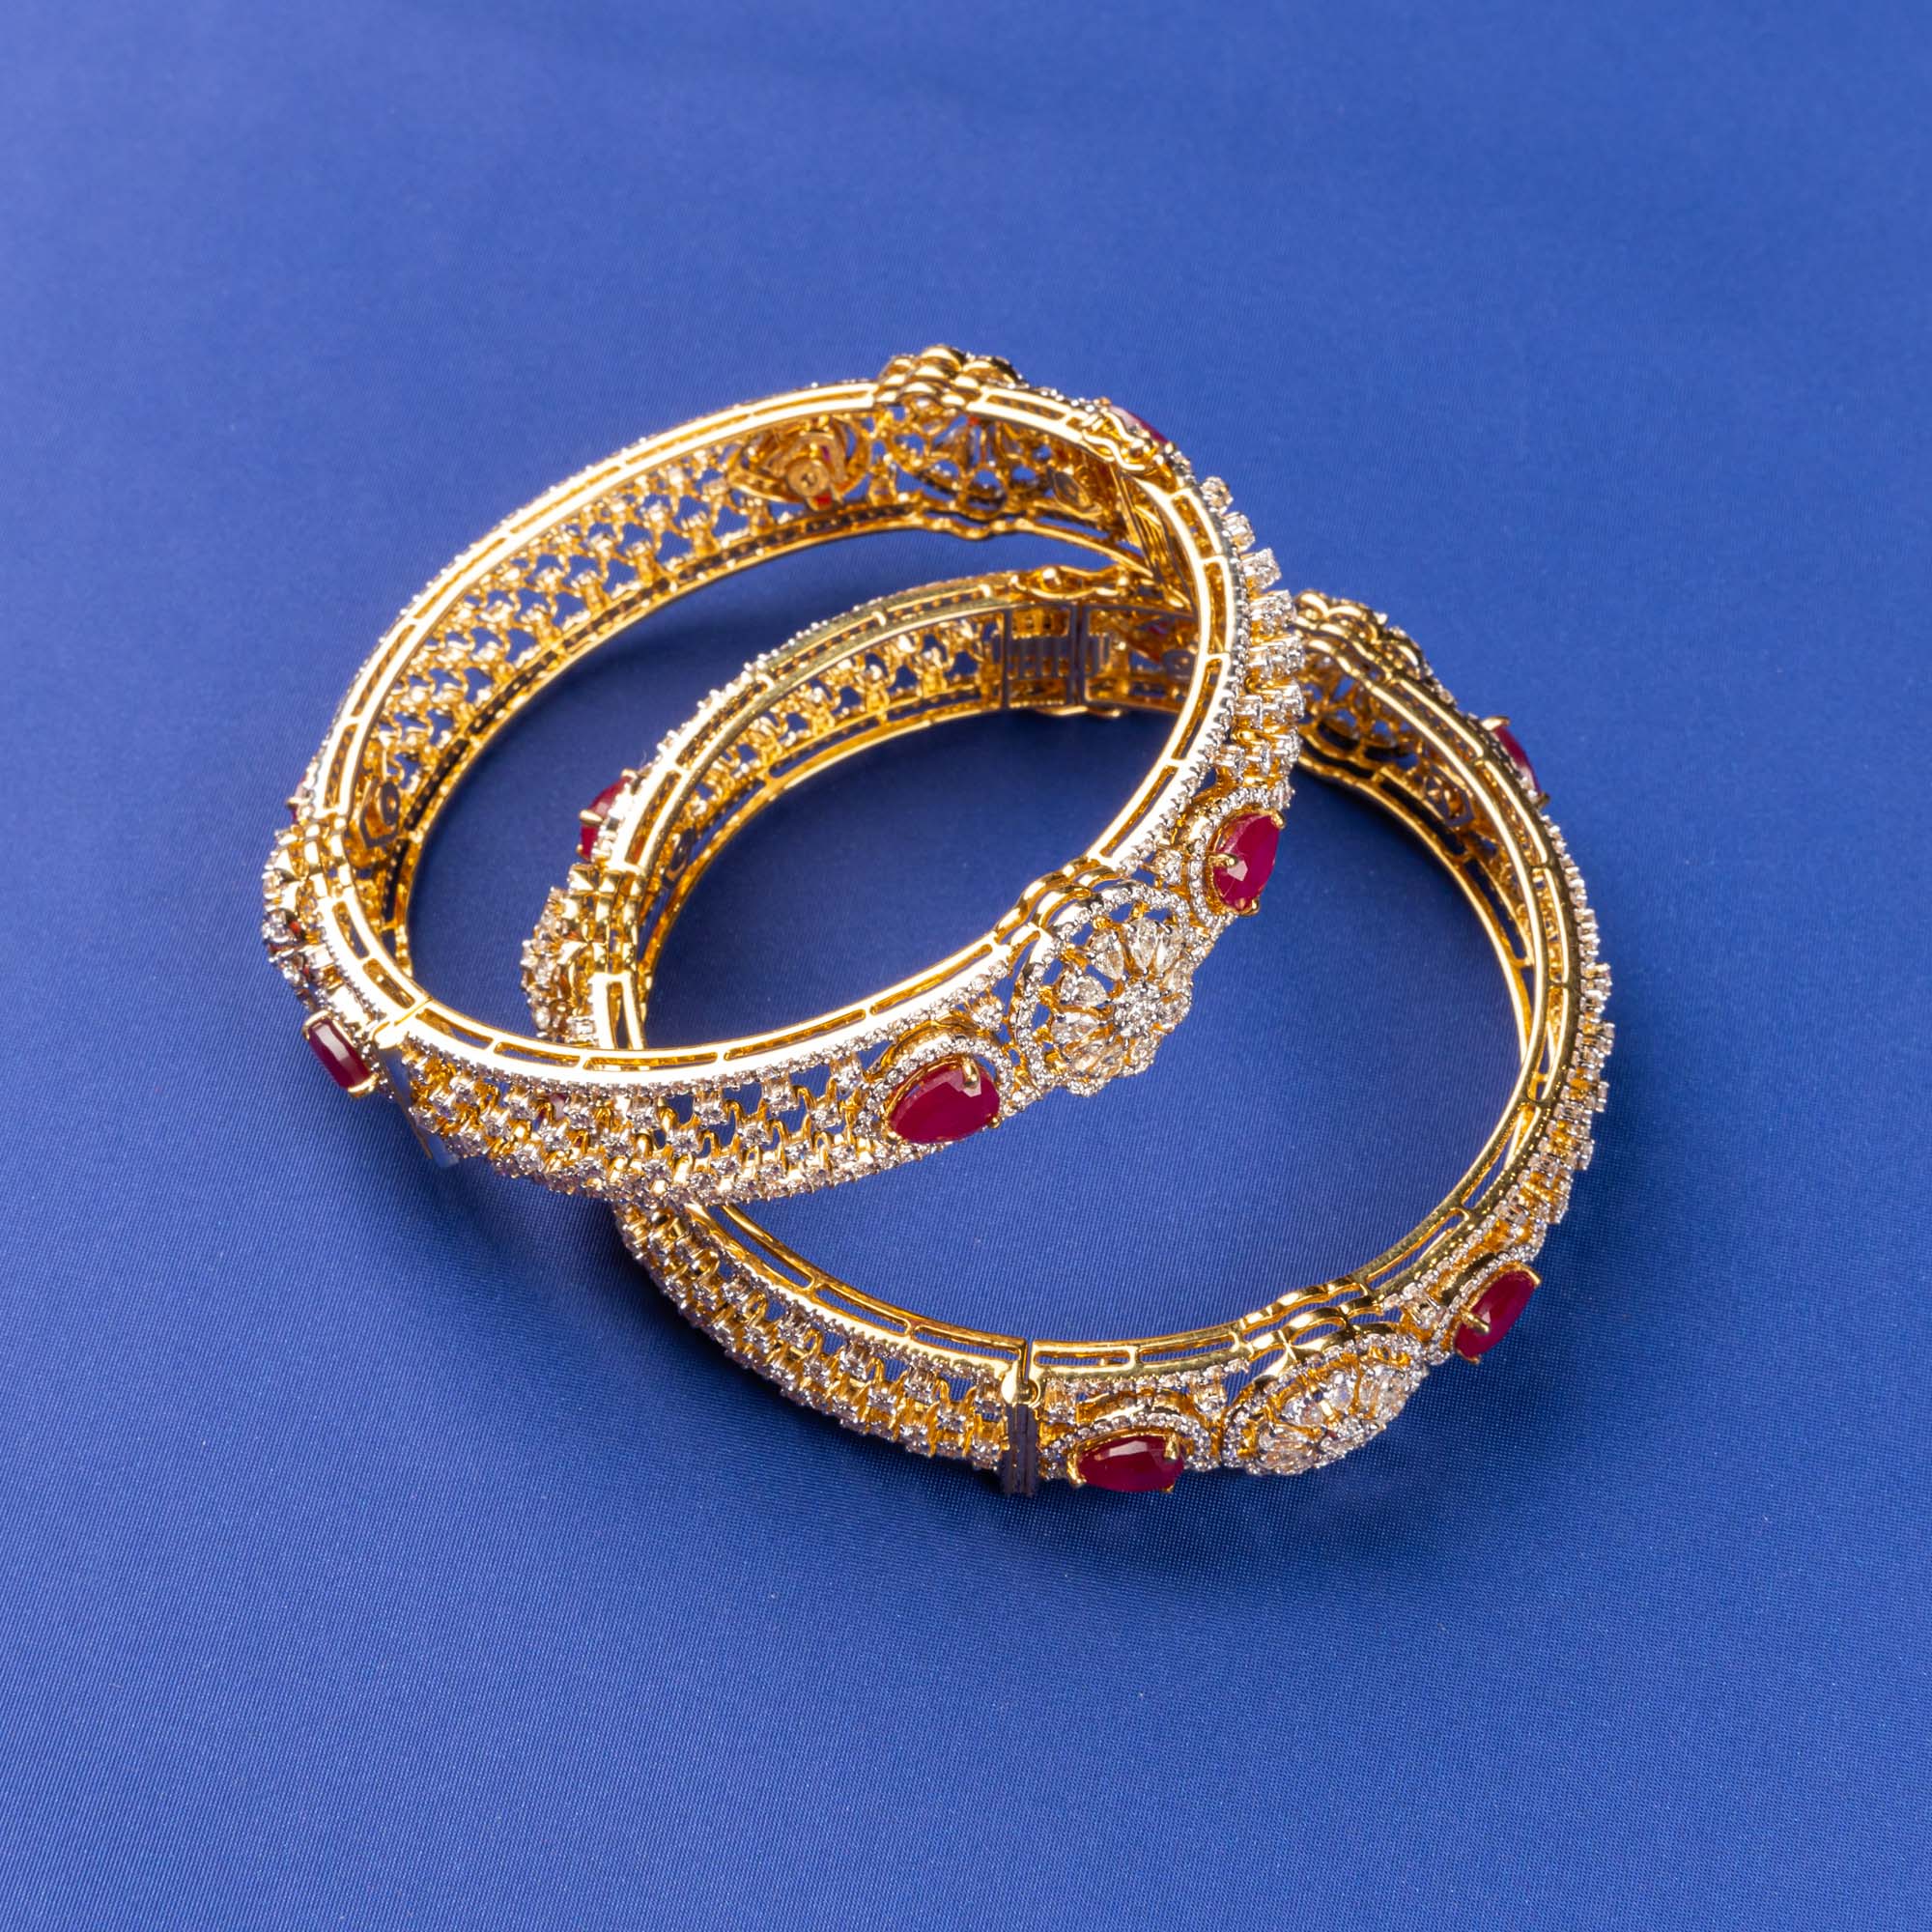 Ruby Red Allure: Handmade 18K Yellow Gold Diamond and Ruby Bangles